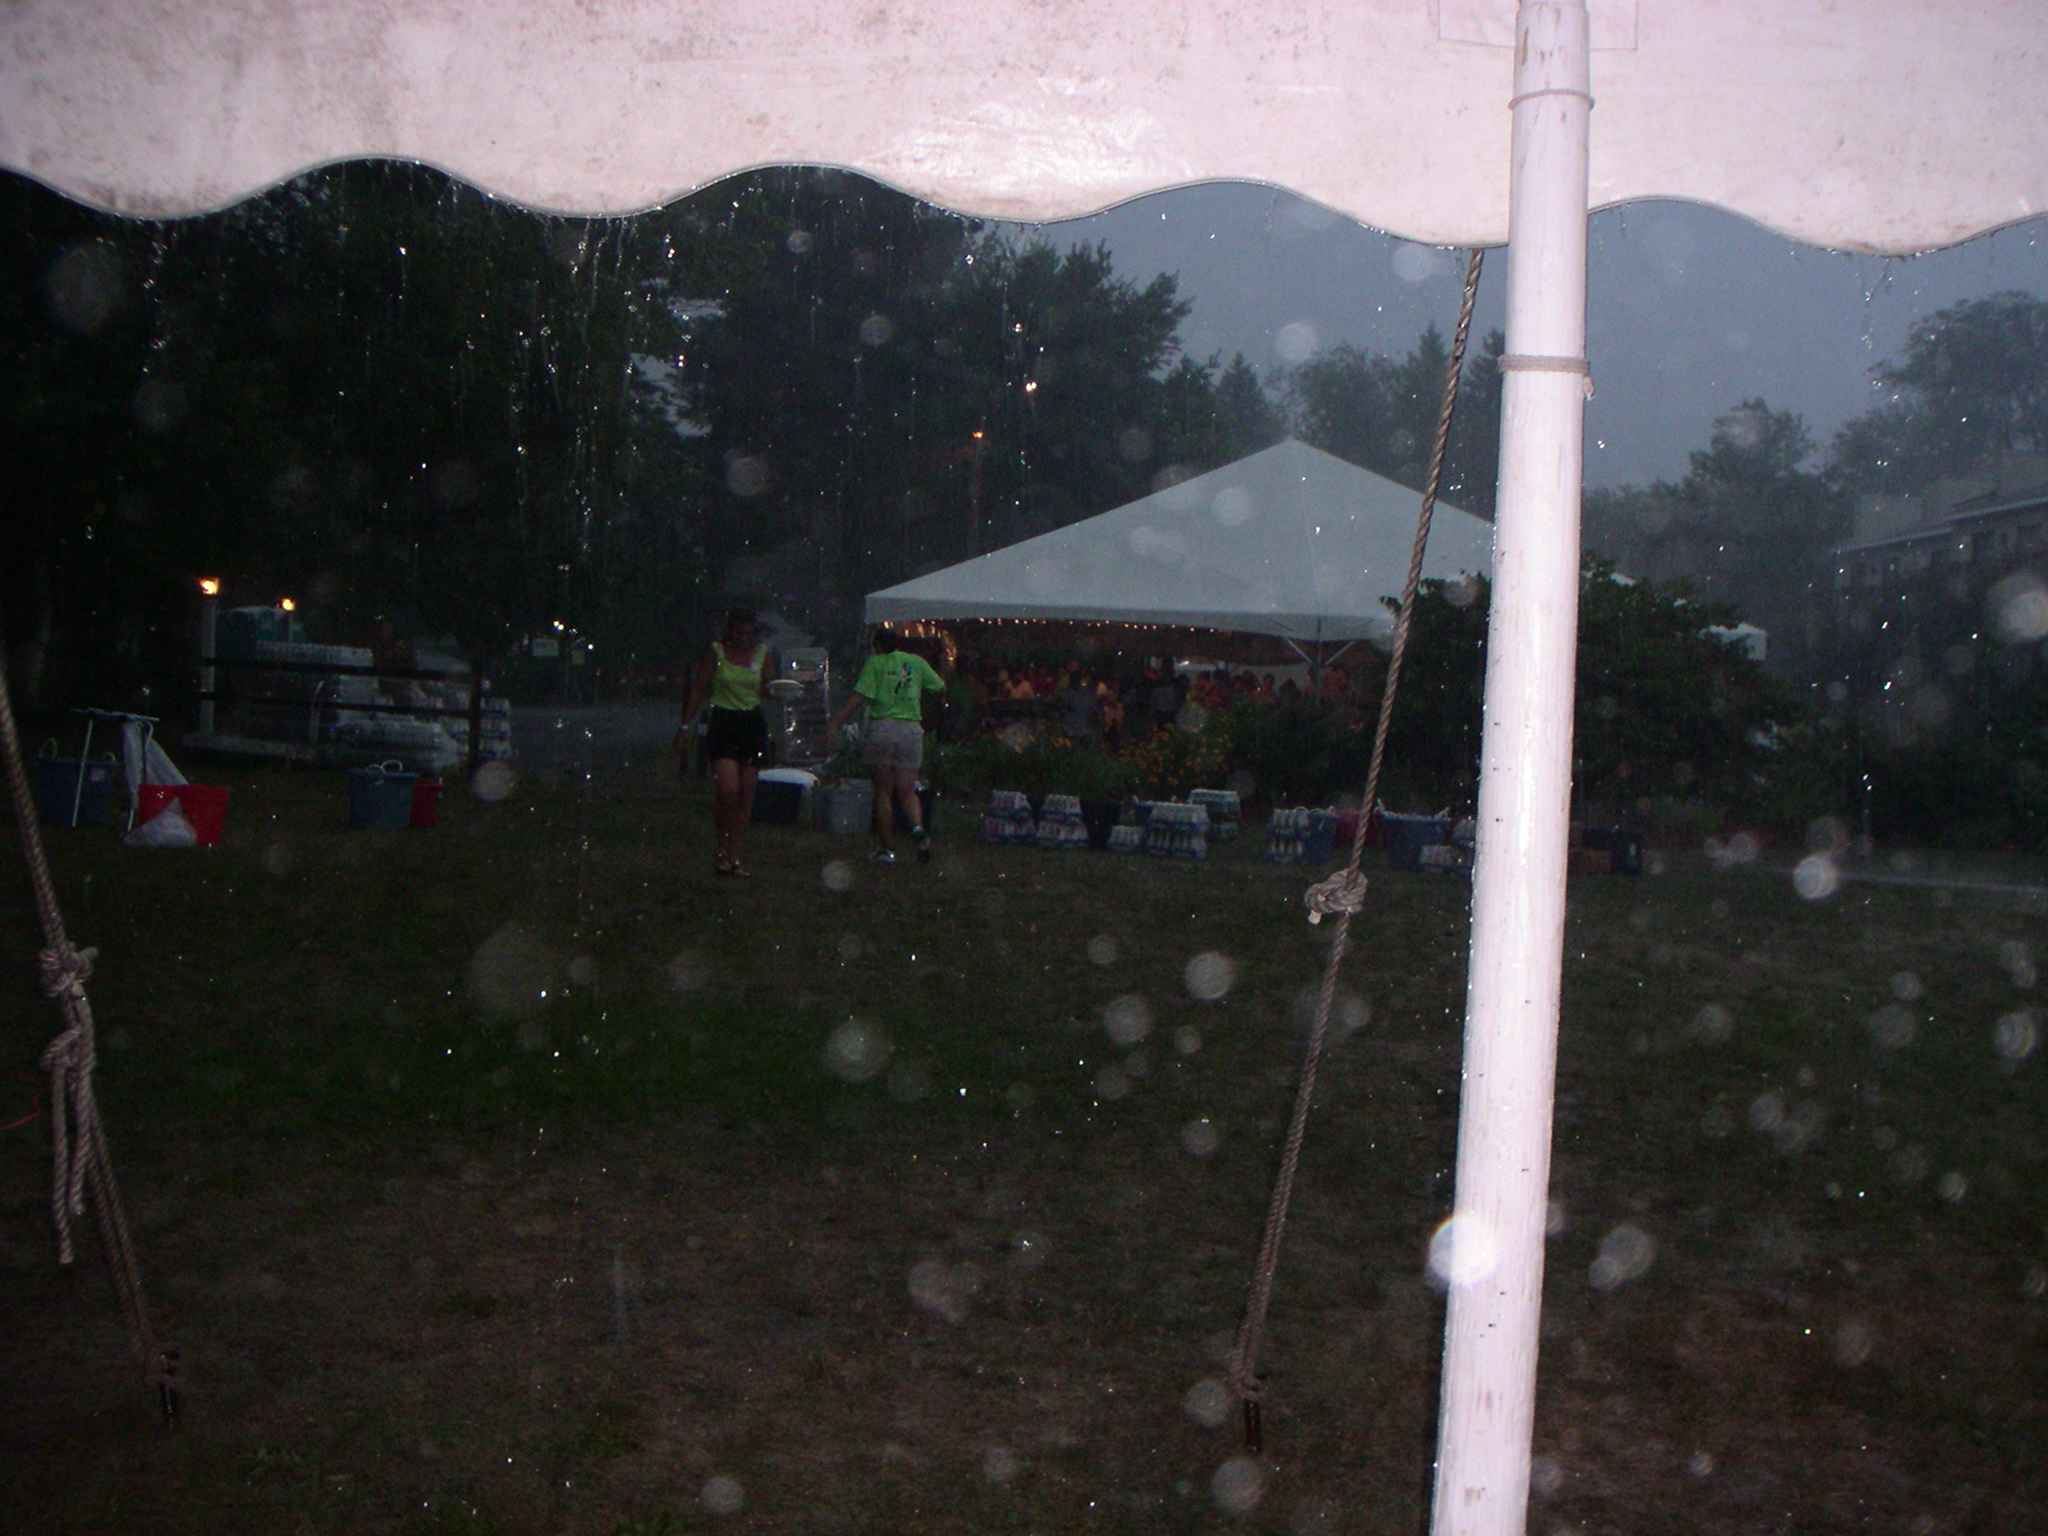 Dining tent during heavy downpour